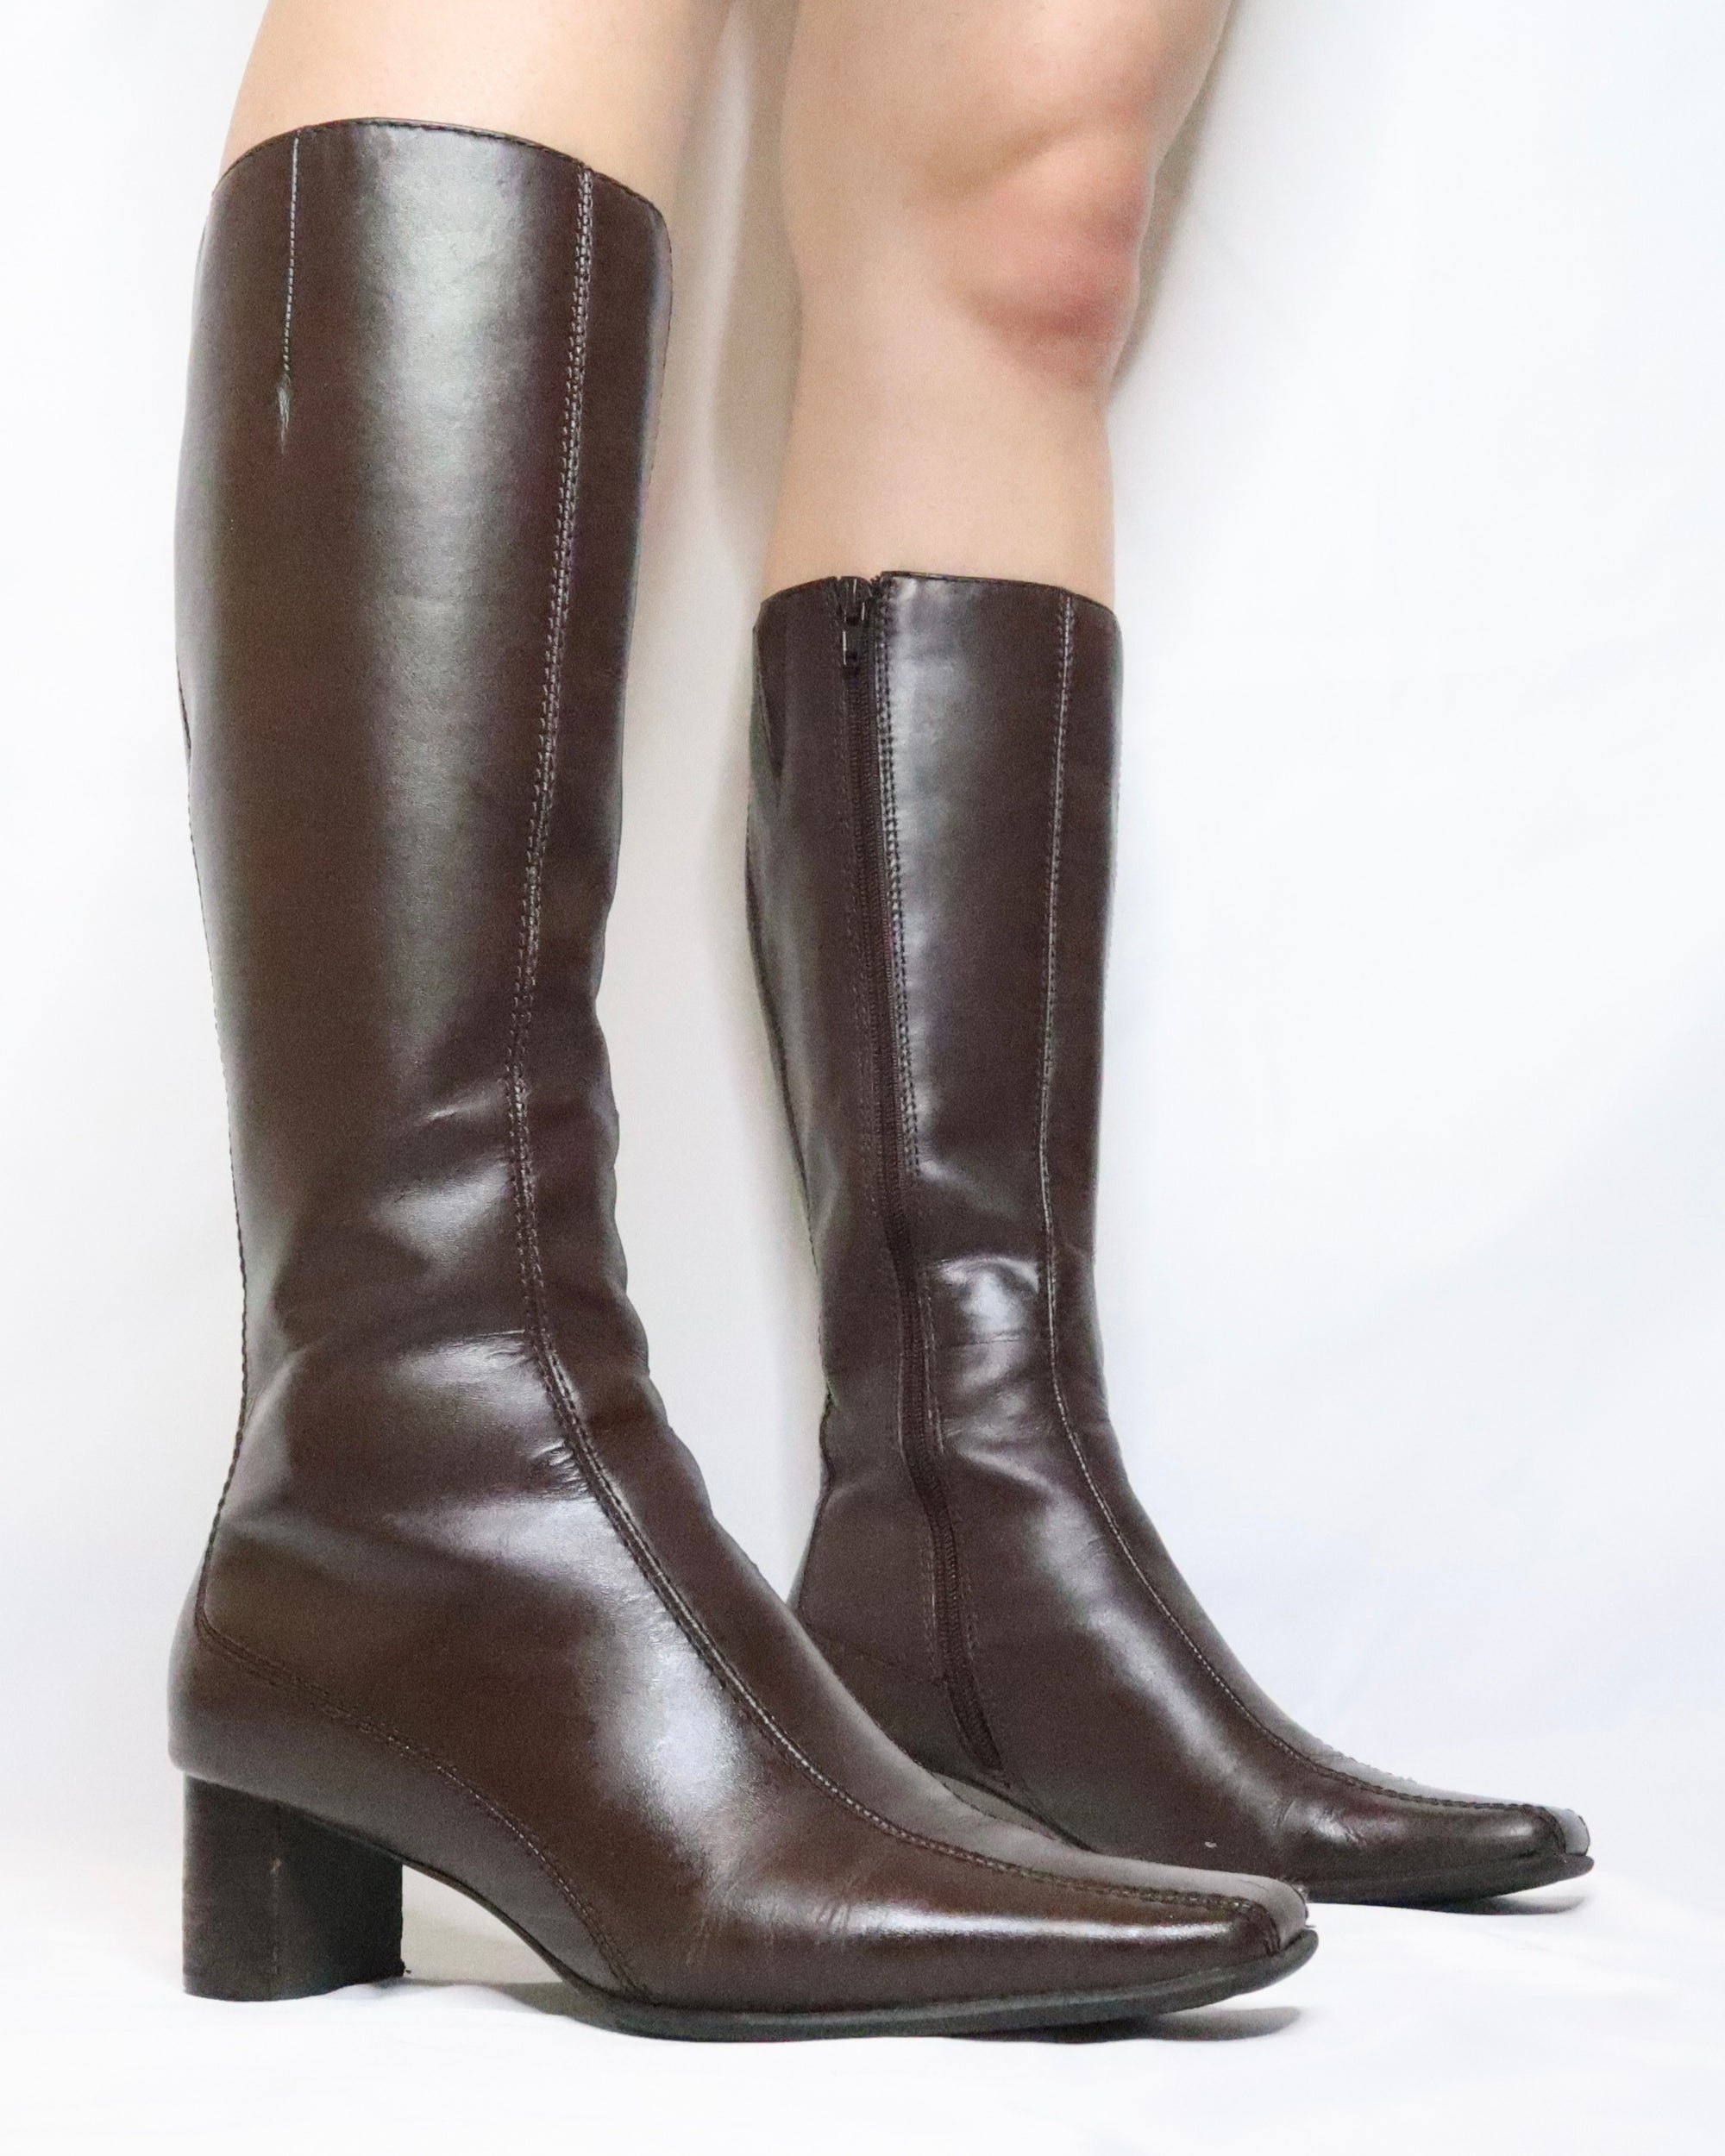 Brown Knee High Leather Boots (6.5 US) 